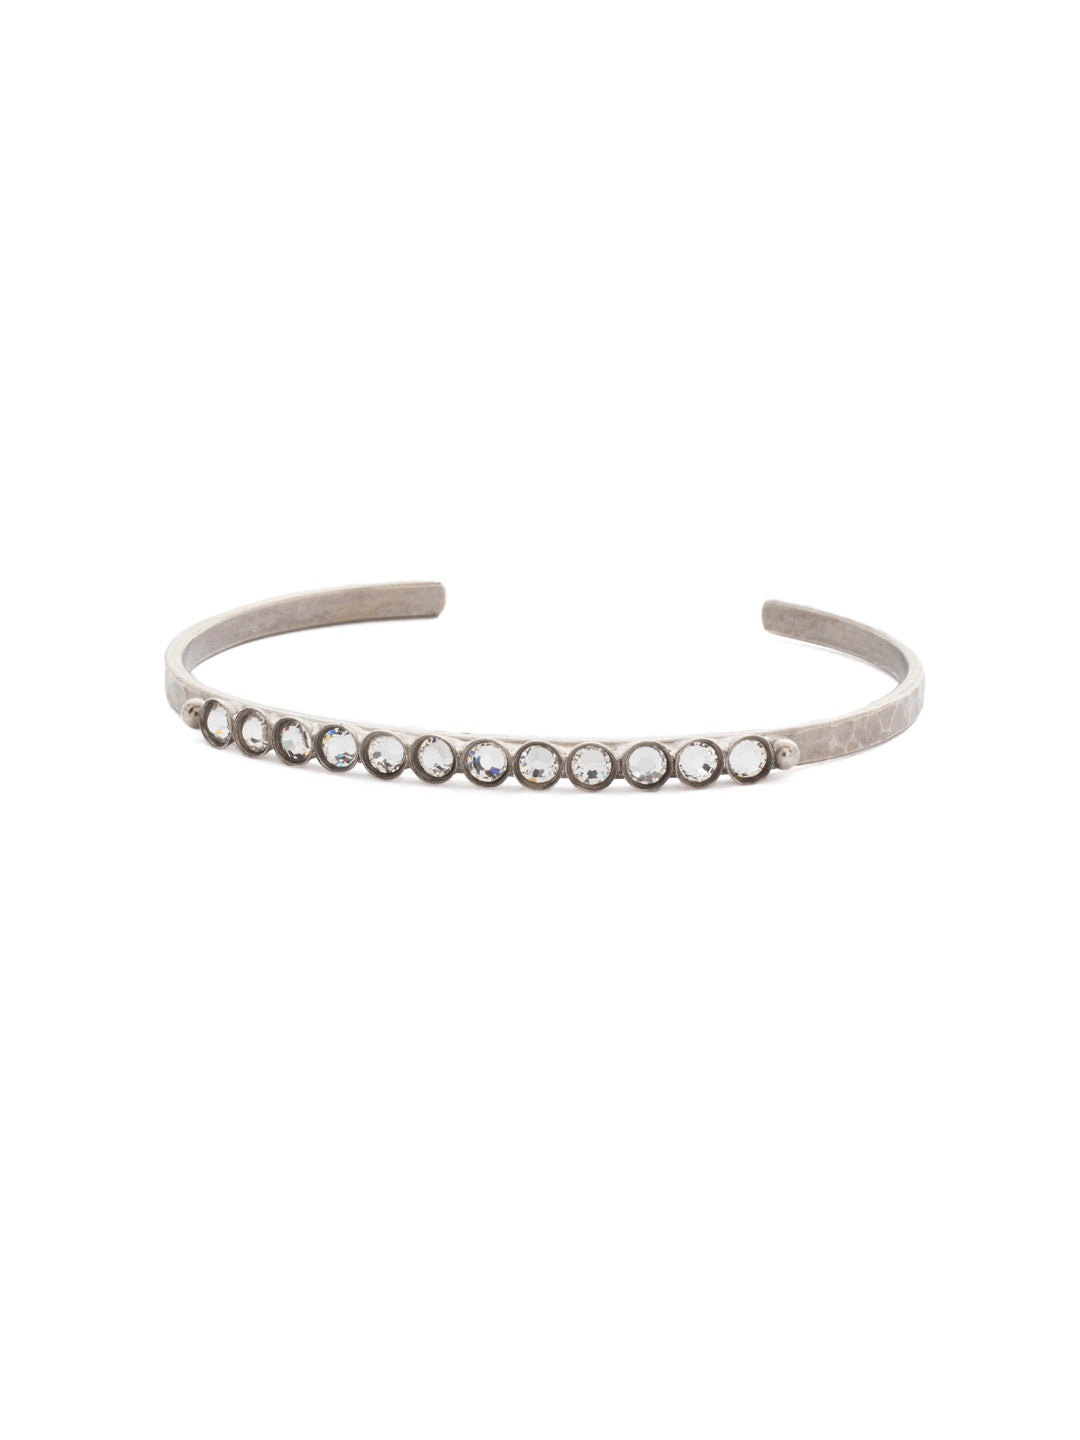 Dotted Line Cuff Bracelet - BDN108ASCRY